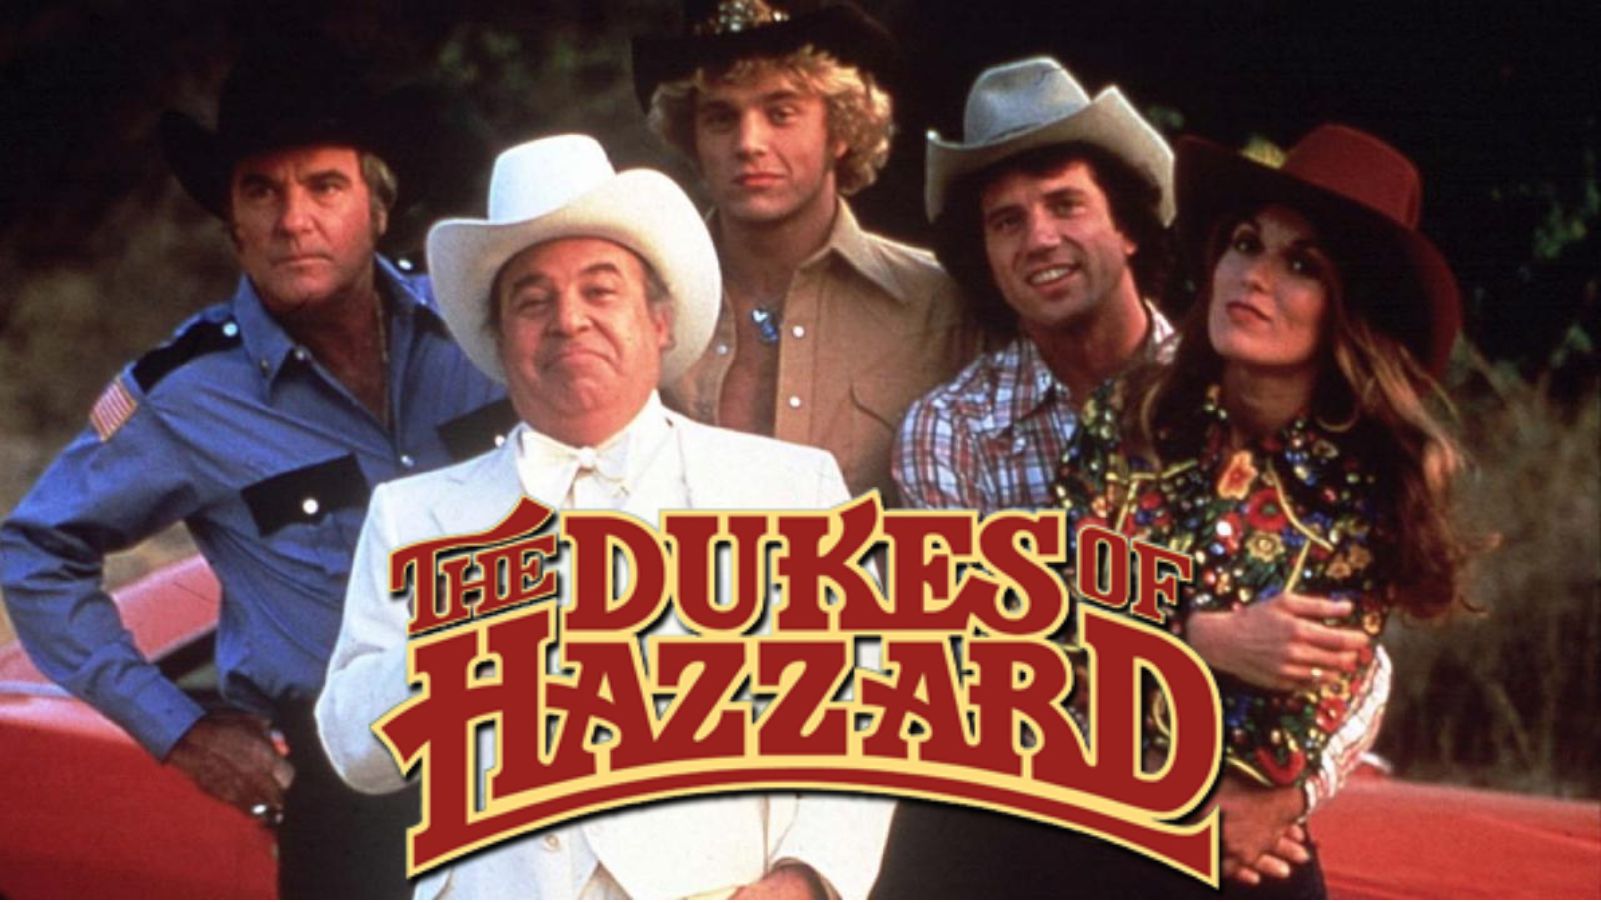 Here S What The Cast Of The Dukes Of Hazzard Look Like Now Hot Sex Picture 9090